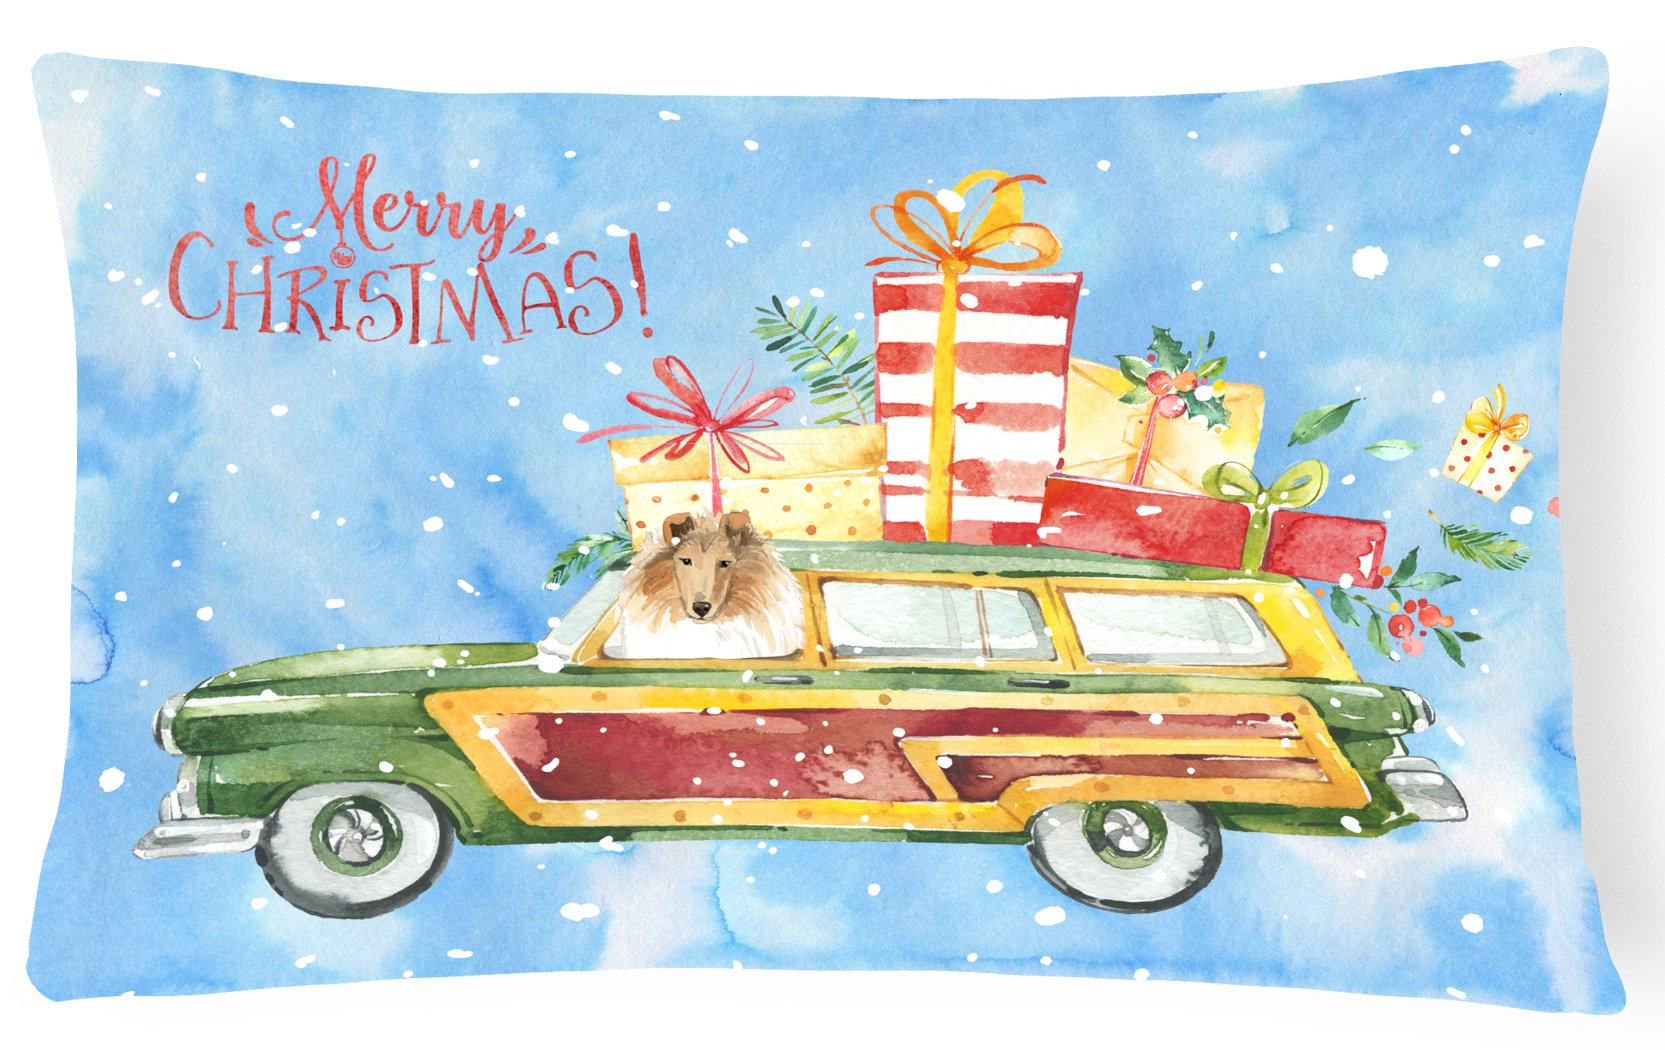 Merry Christmas Collie Canvas Fabric Decorative Pillow CK2418PW1216 by Caroline's Treasures